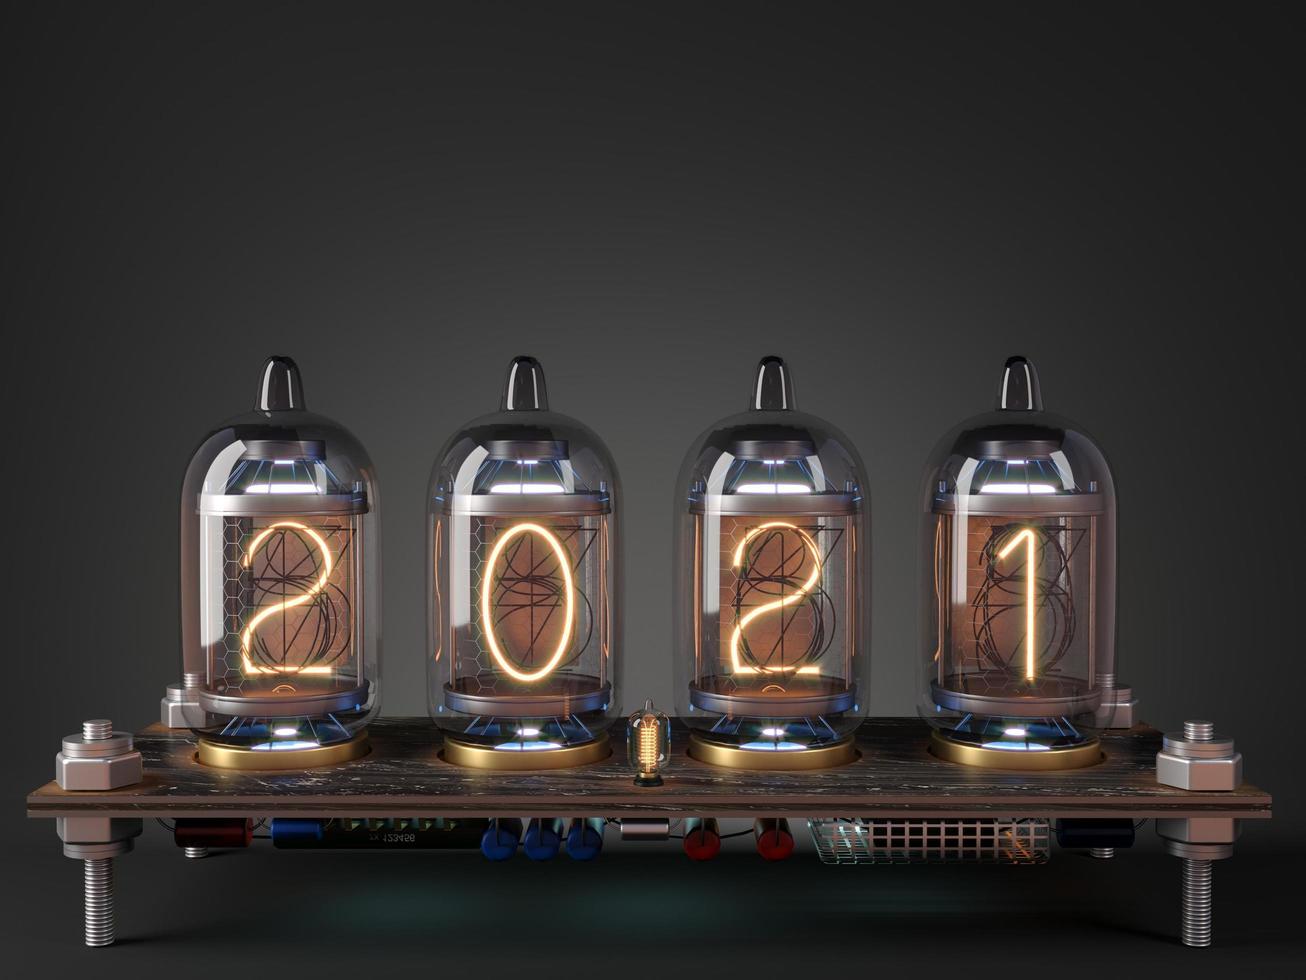 Tube processor calendar and date 2021 new year photo